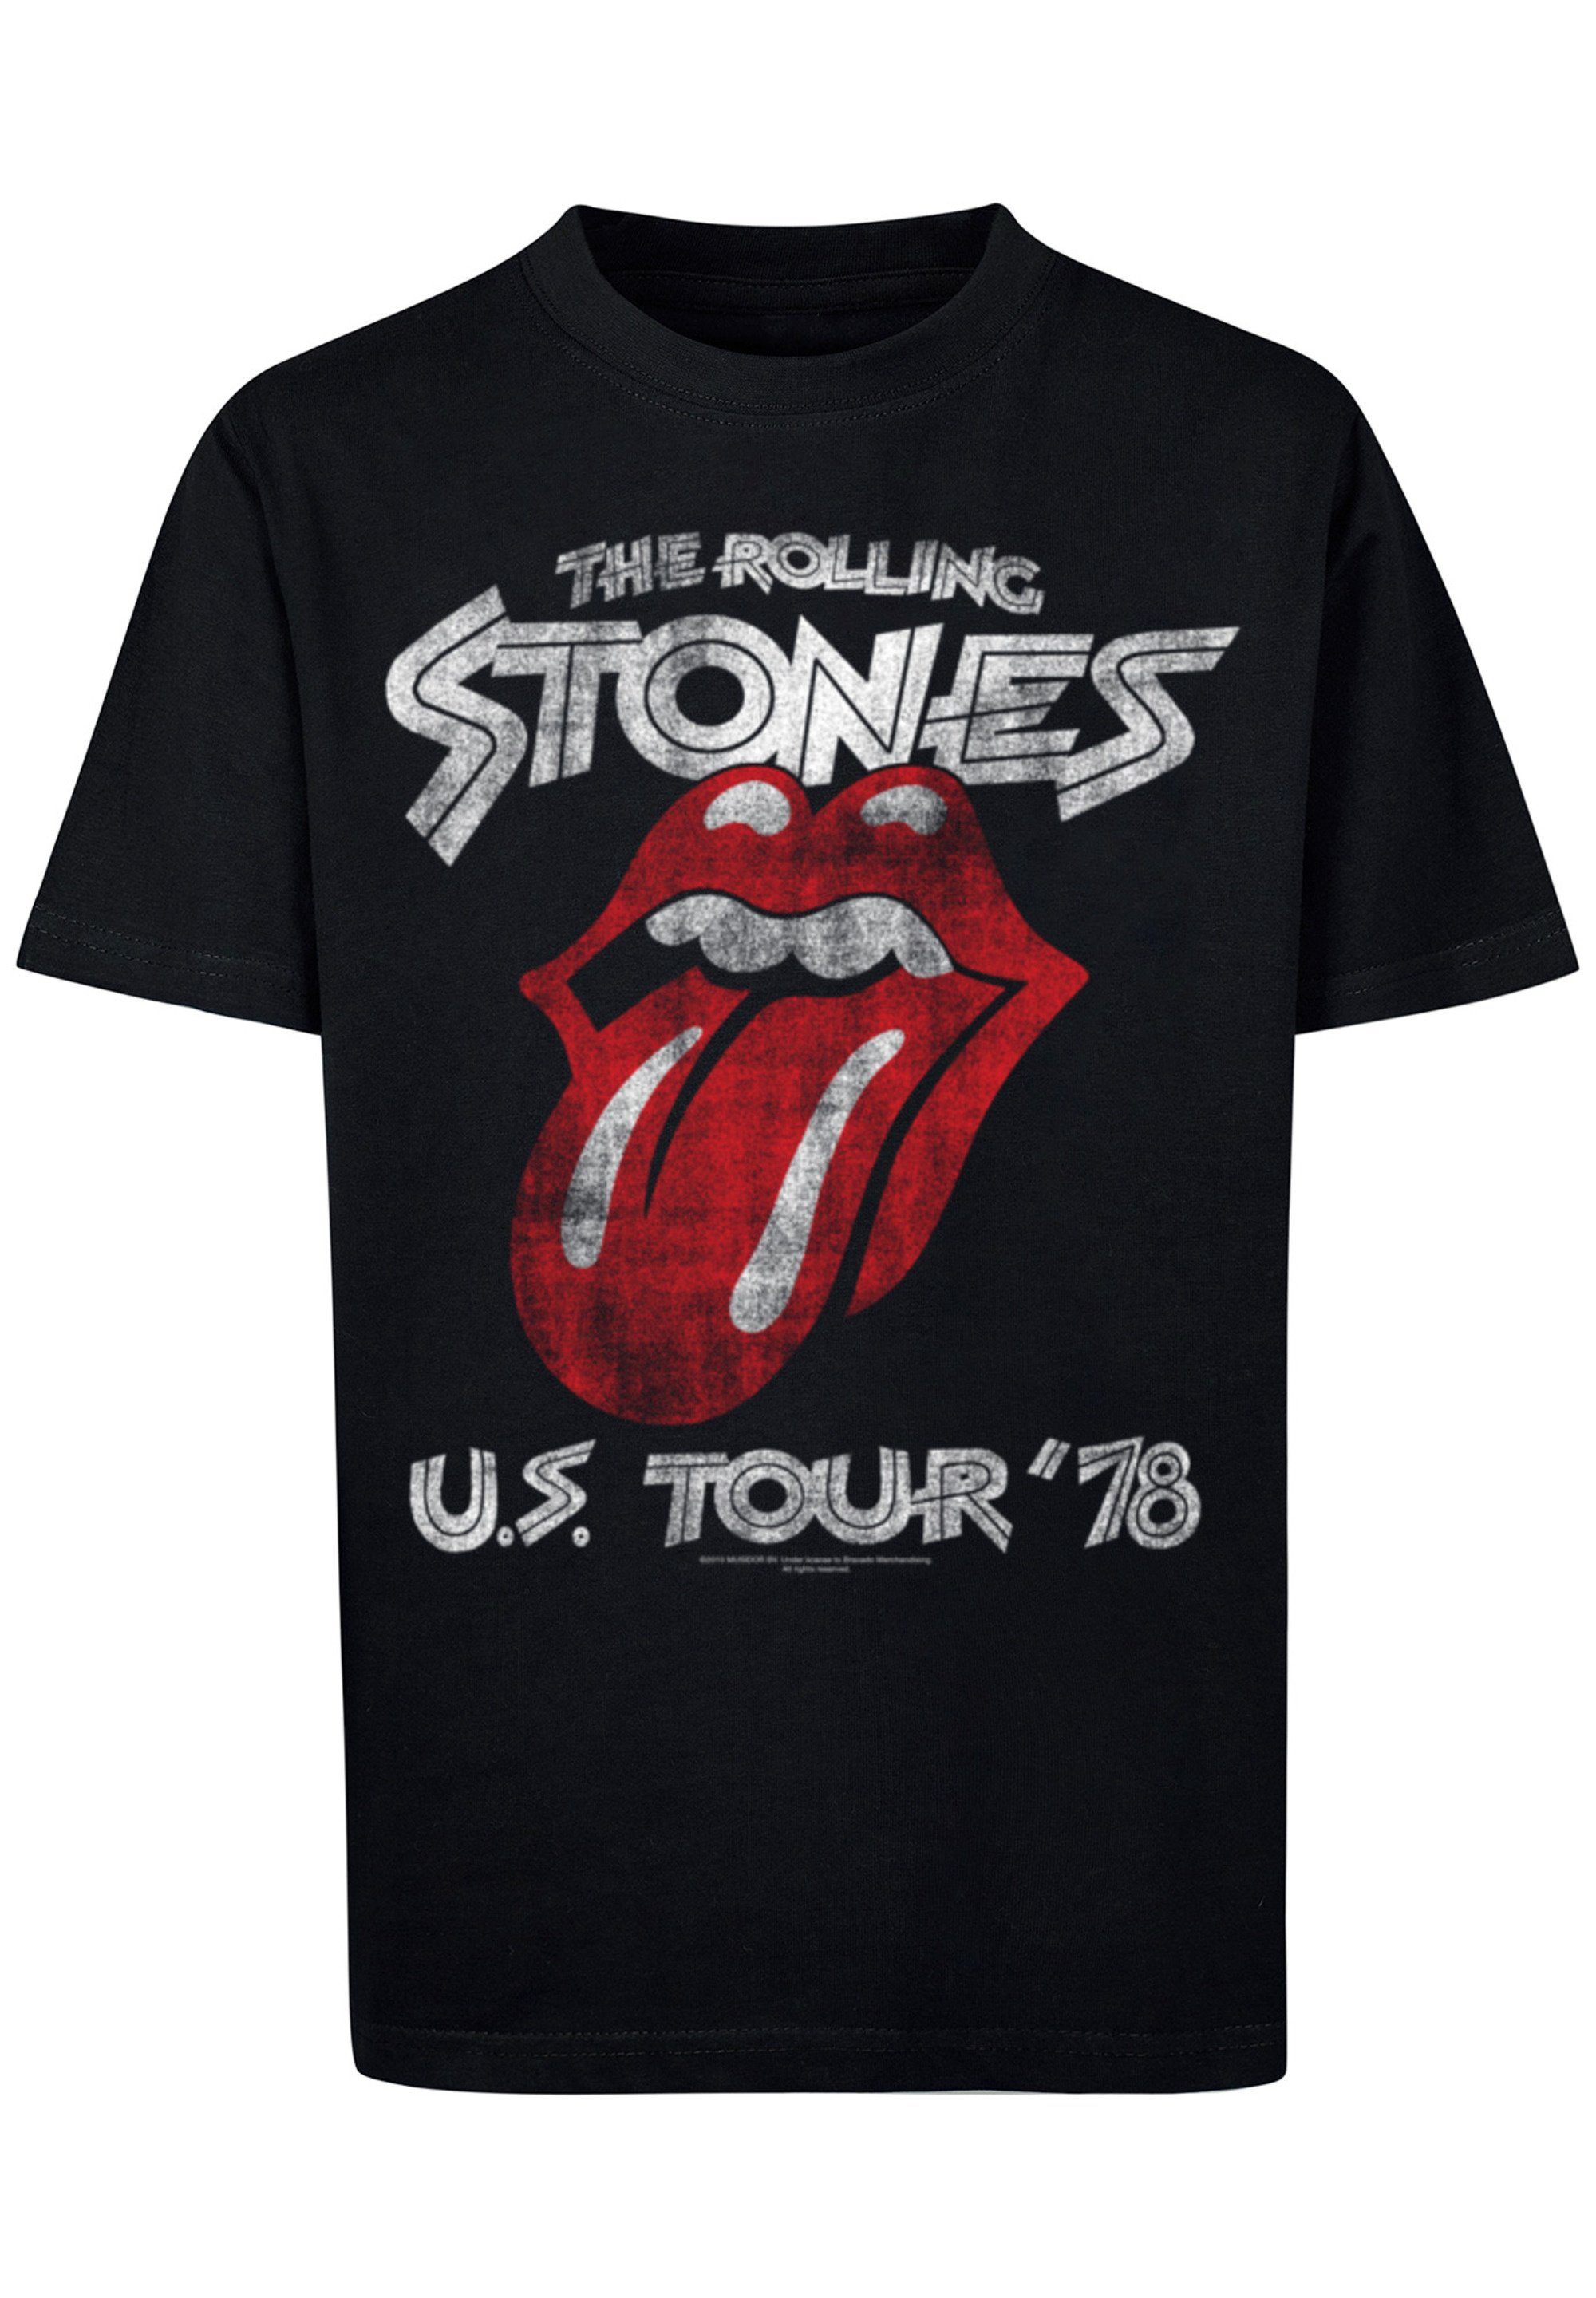 The Band '78 Print US Rock Stones Tour Rolling T-Shirt F4NT4STIC Front